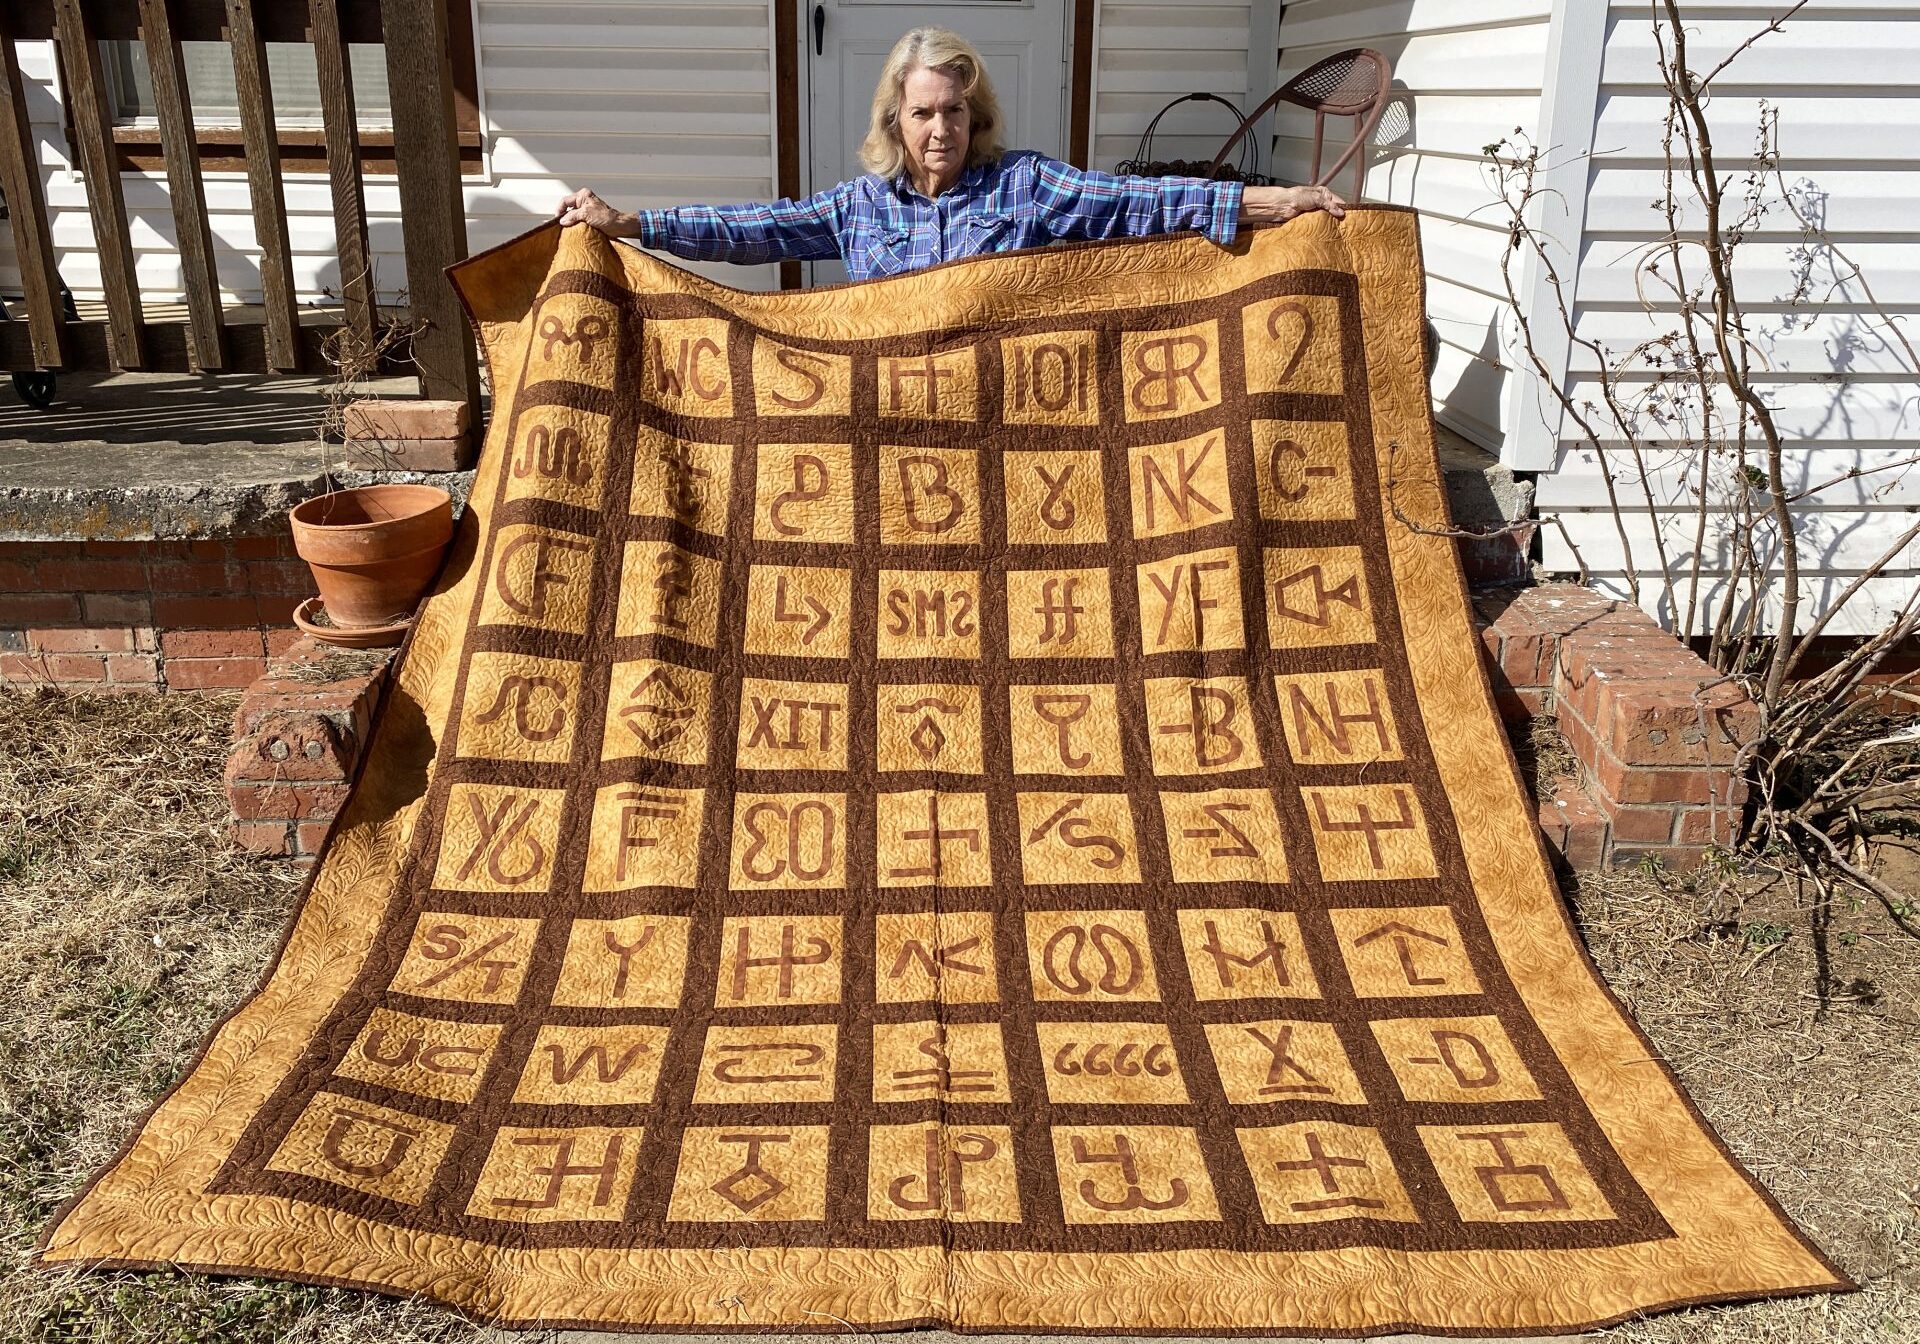 A person sitting in front of a quilt with the letters of the alphabet on it.